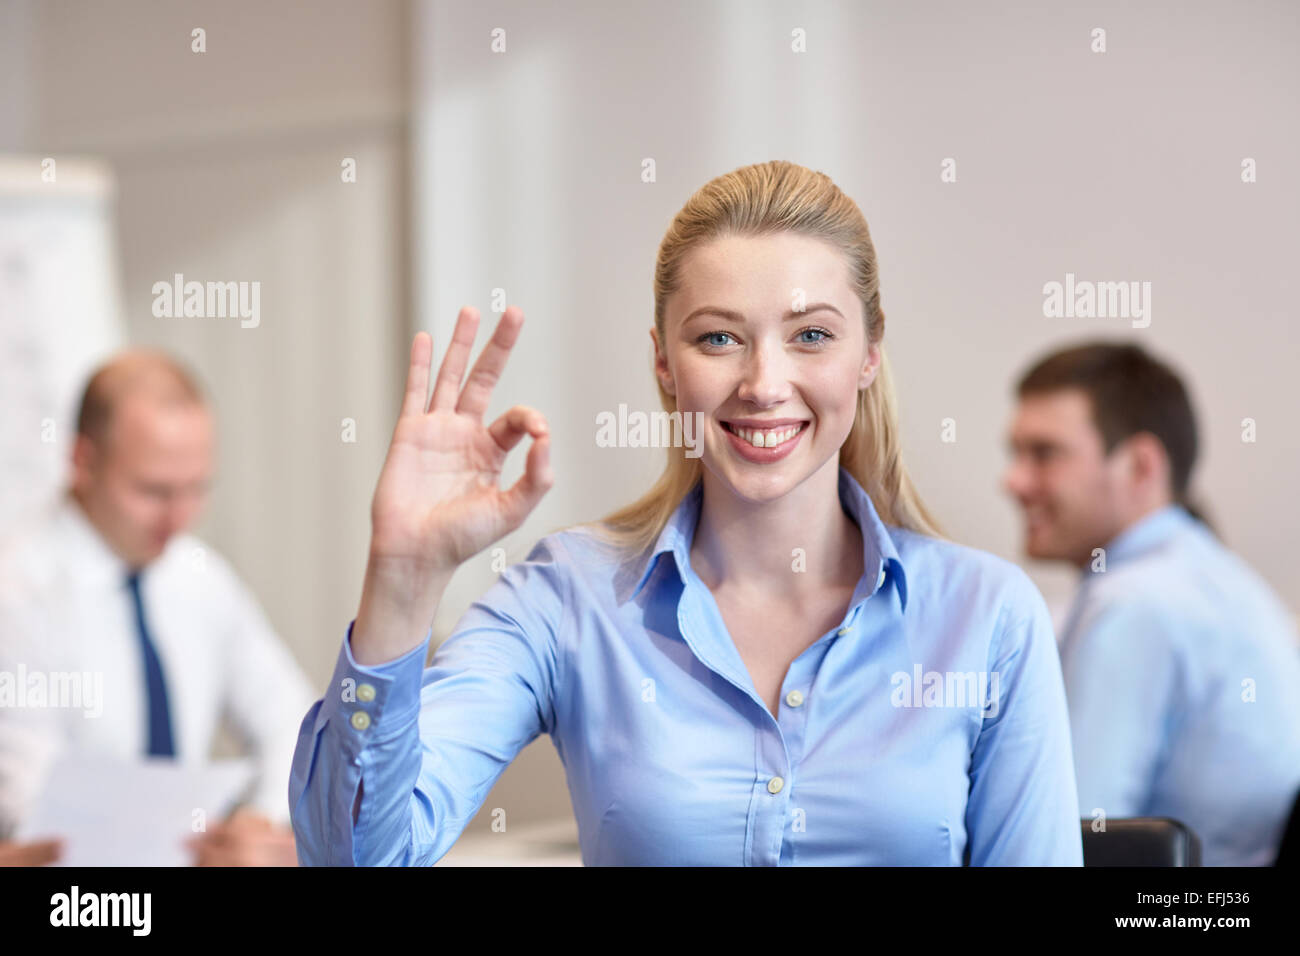 Group of smiling businesspeople meeting in office Banque D'Images